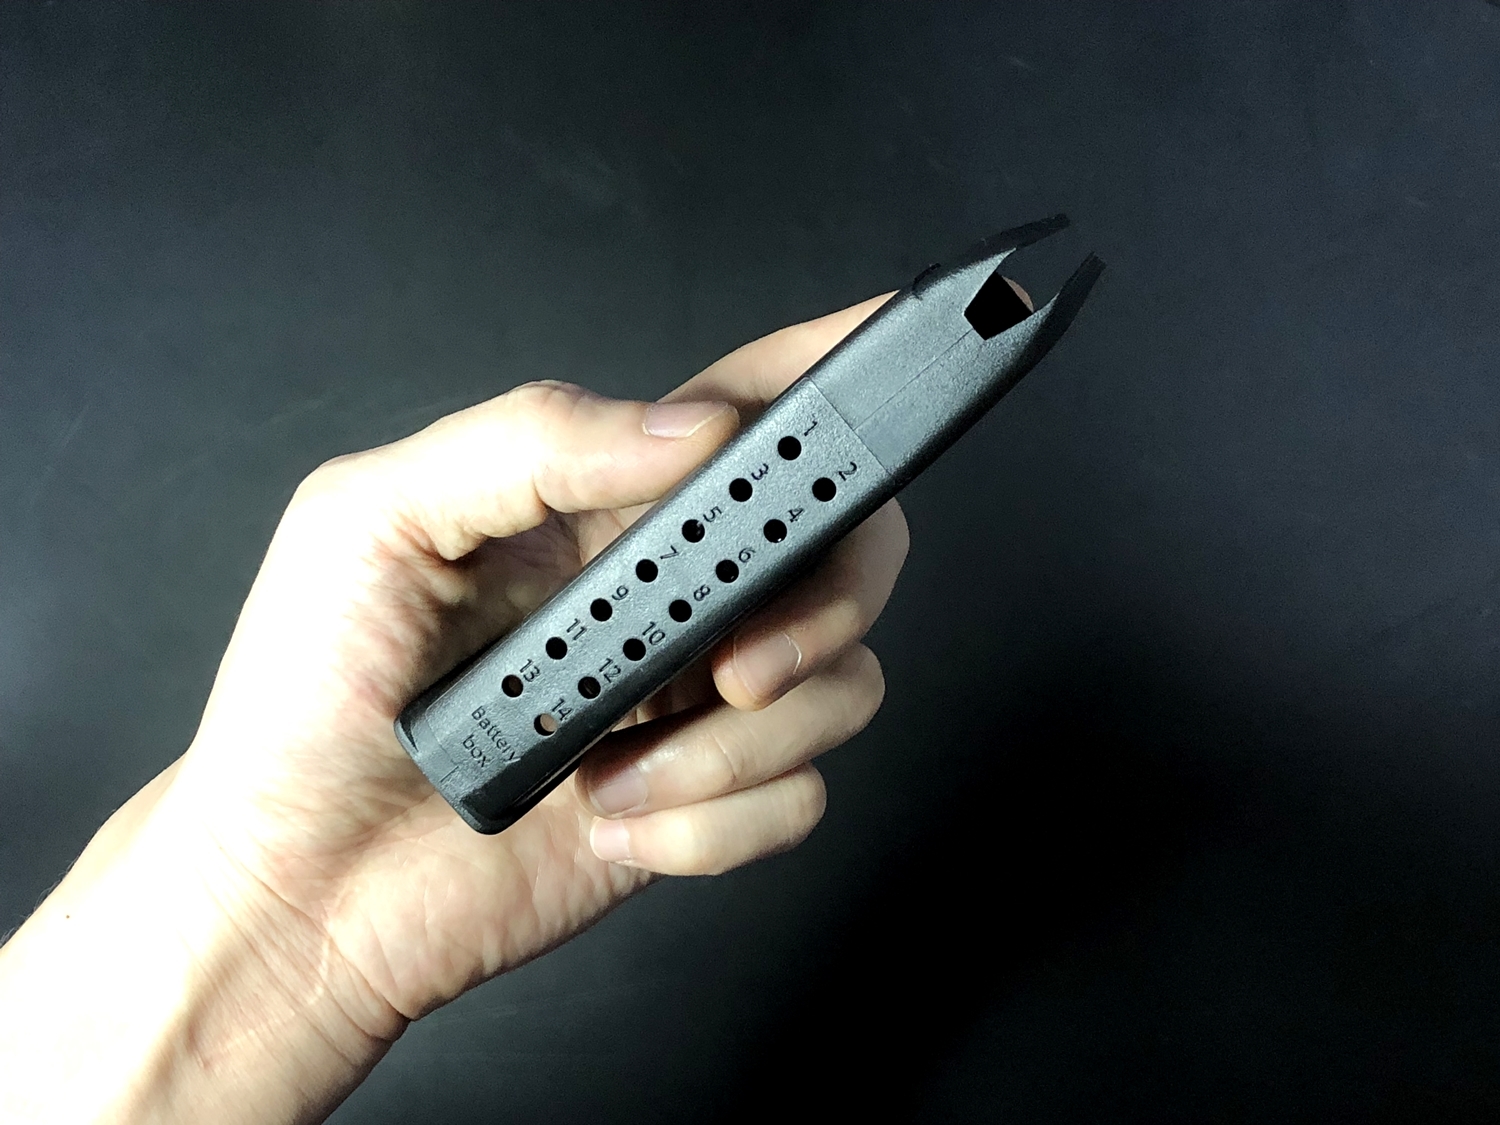 2 TMC GLOCK MAGAZINE STYLE CR123A BATTERY CASE グロック マガジン スタイル 電池ケース SUREFIRE SF123A 純正電池!! 購入 開封 取付 レビュー!!